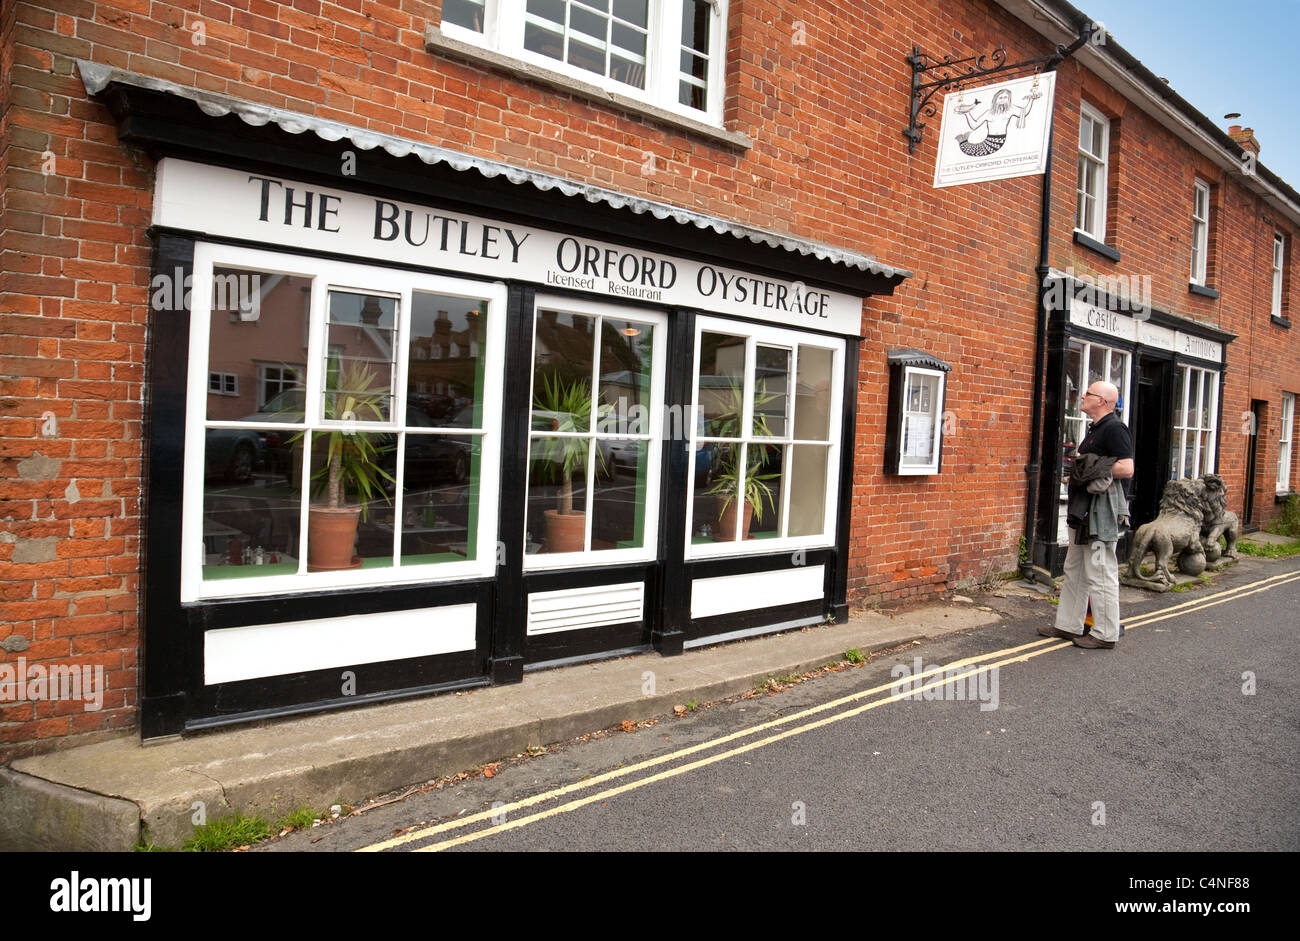 A man looking at the menu outside The Butley Orford Oysterage, Orford village Suffolk UK Stock Photo